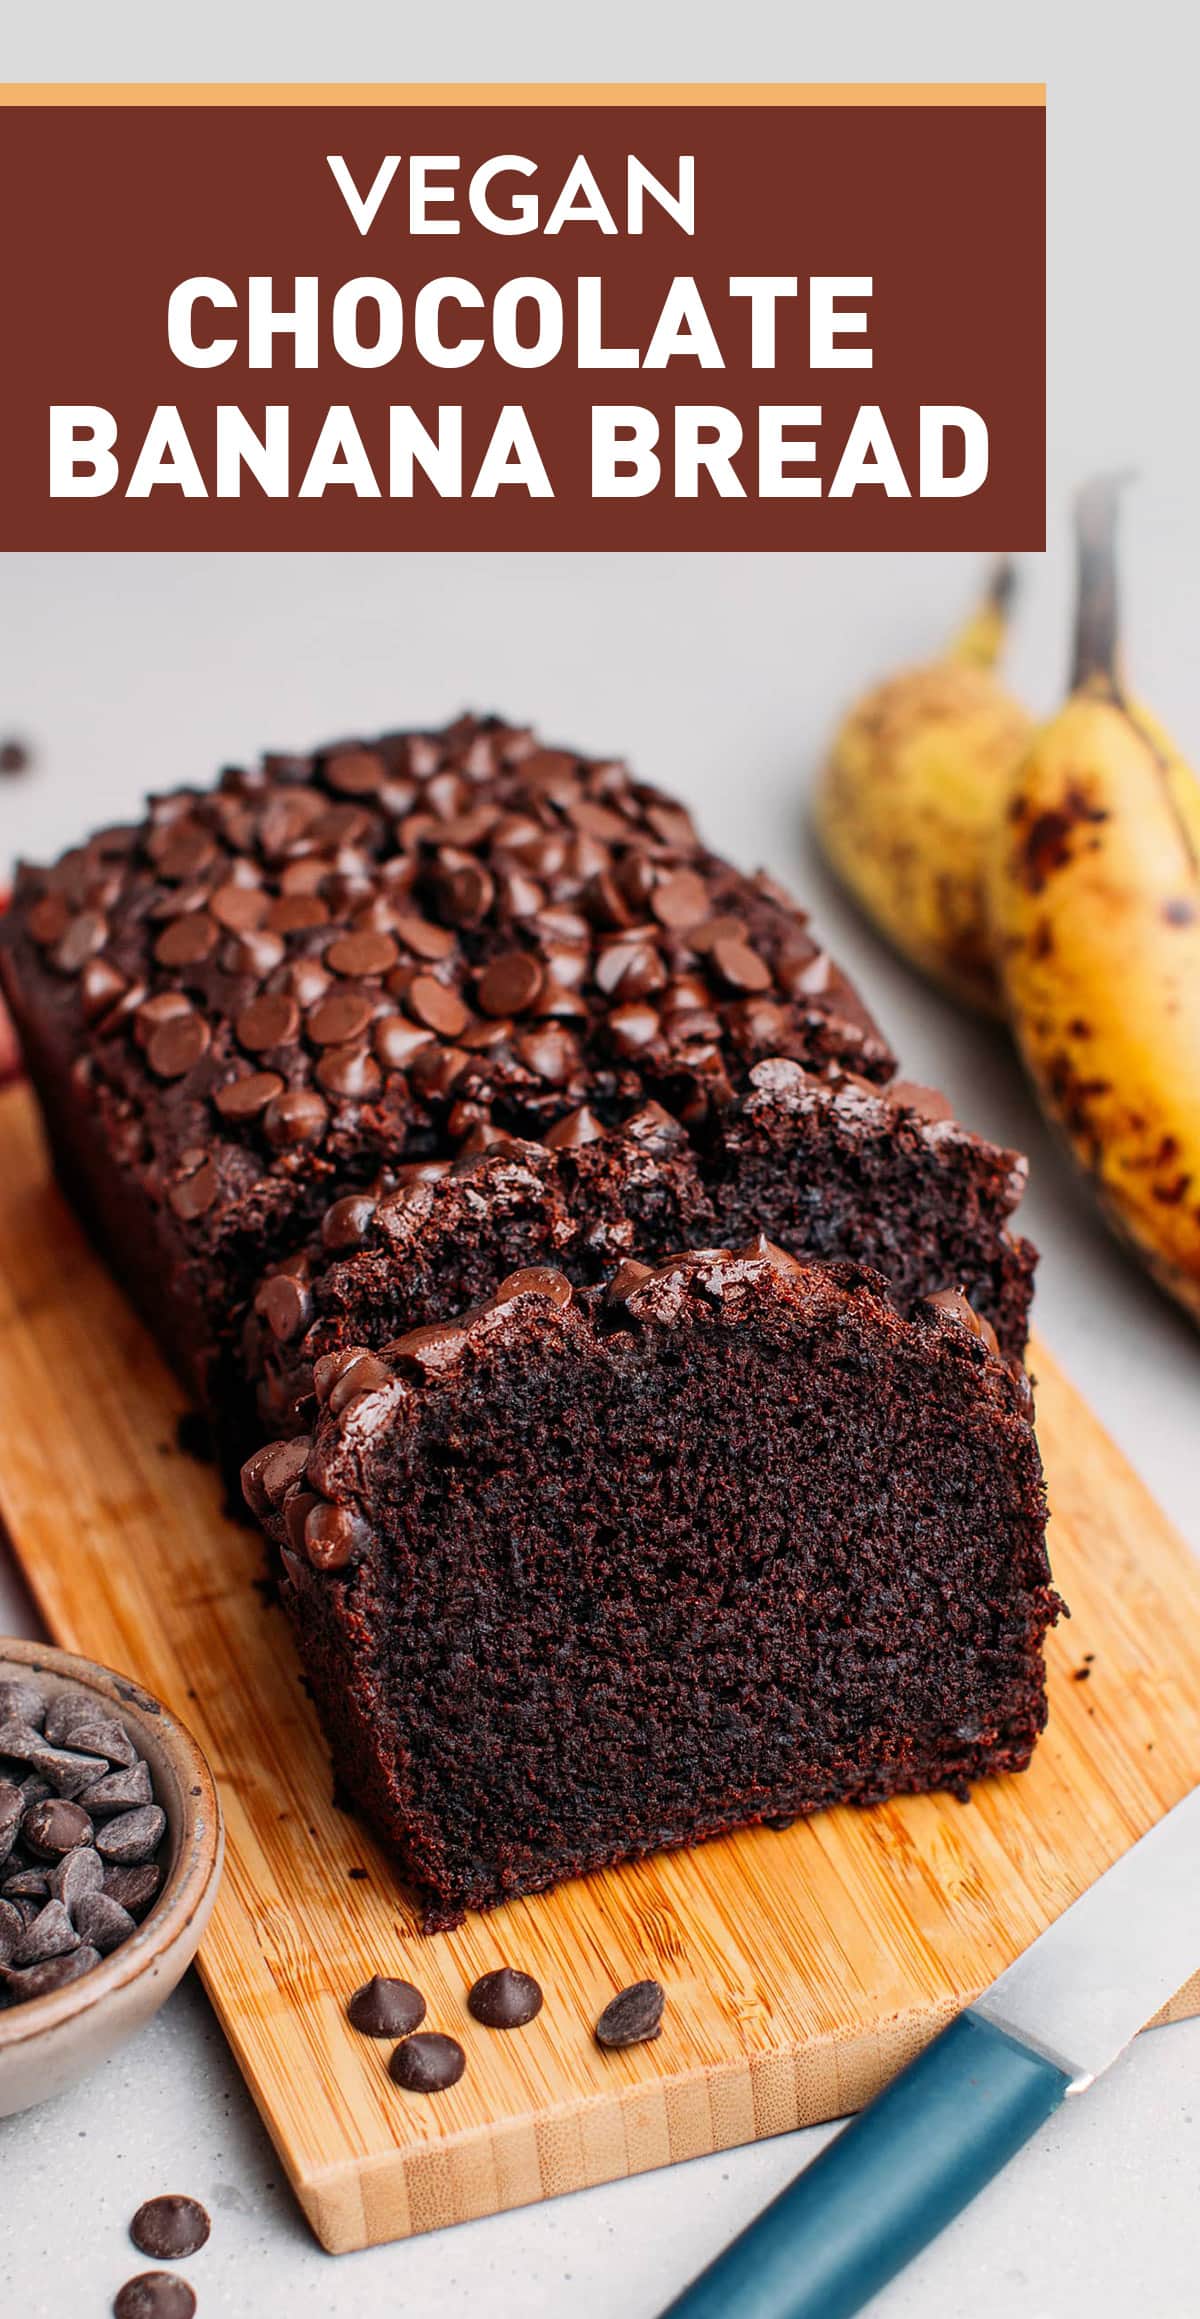 Introducing the fudgiest vegan chocolate banana bread! This 10-ingredient bread is rich, soft, and perfectly moist. It's a real treat that your whole family will love! Enjoy for breakfast, as an afternoon pick-me-up, or as a decadent dessert! #bananabread #vegan